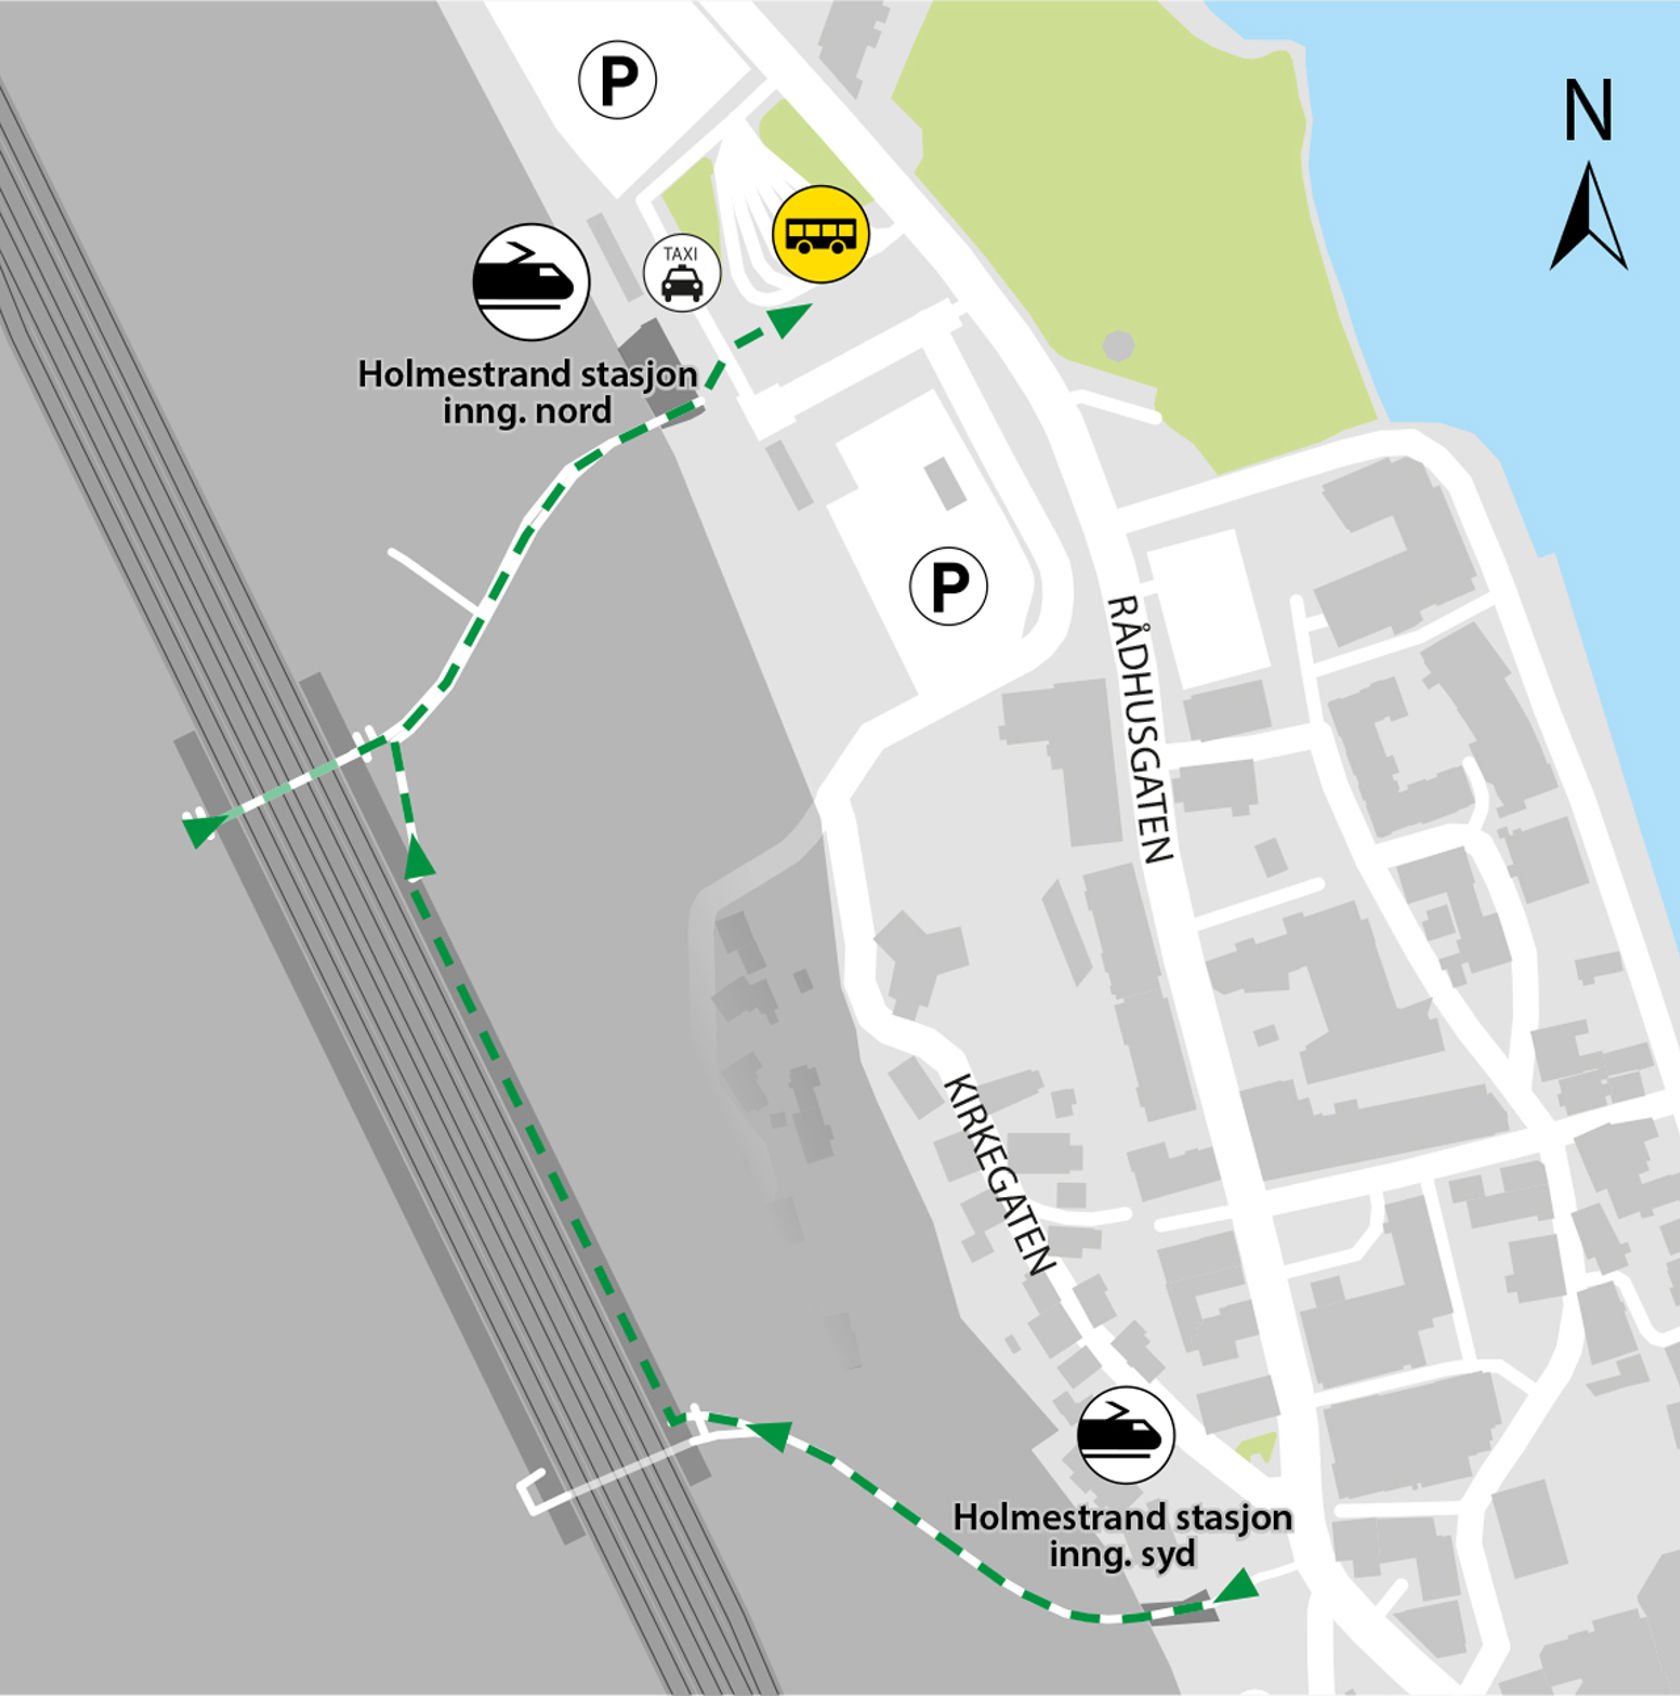 Map shows rail replacement service departs from Holmestrand station bus terminal